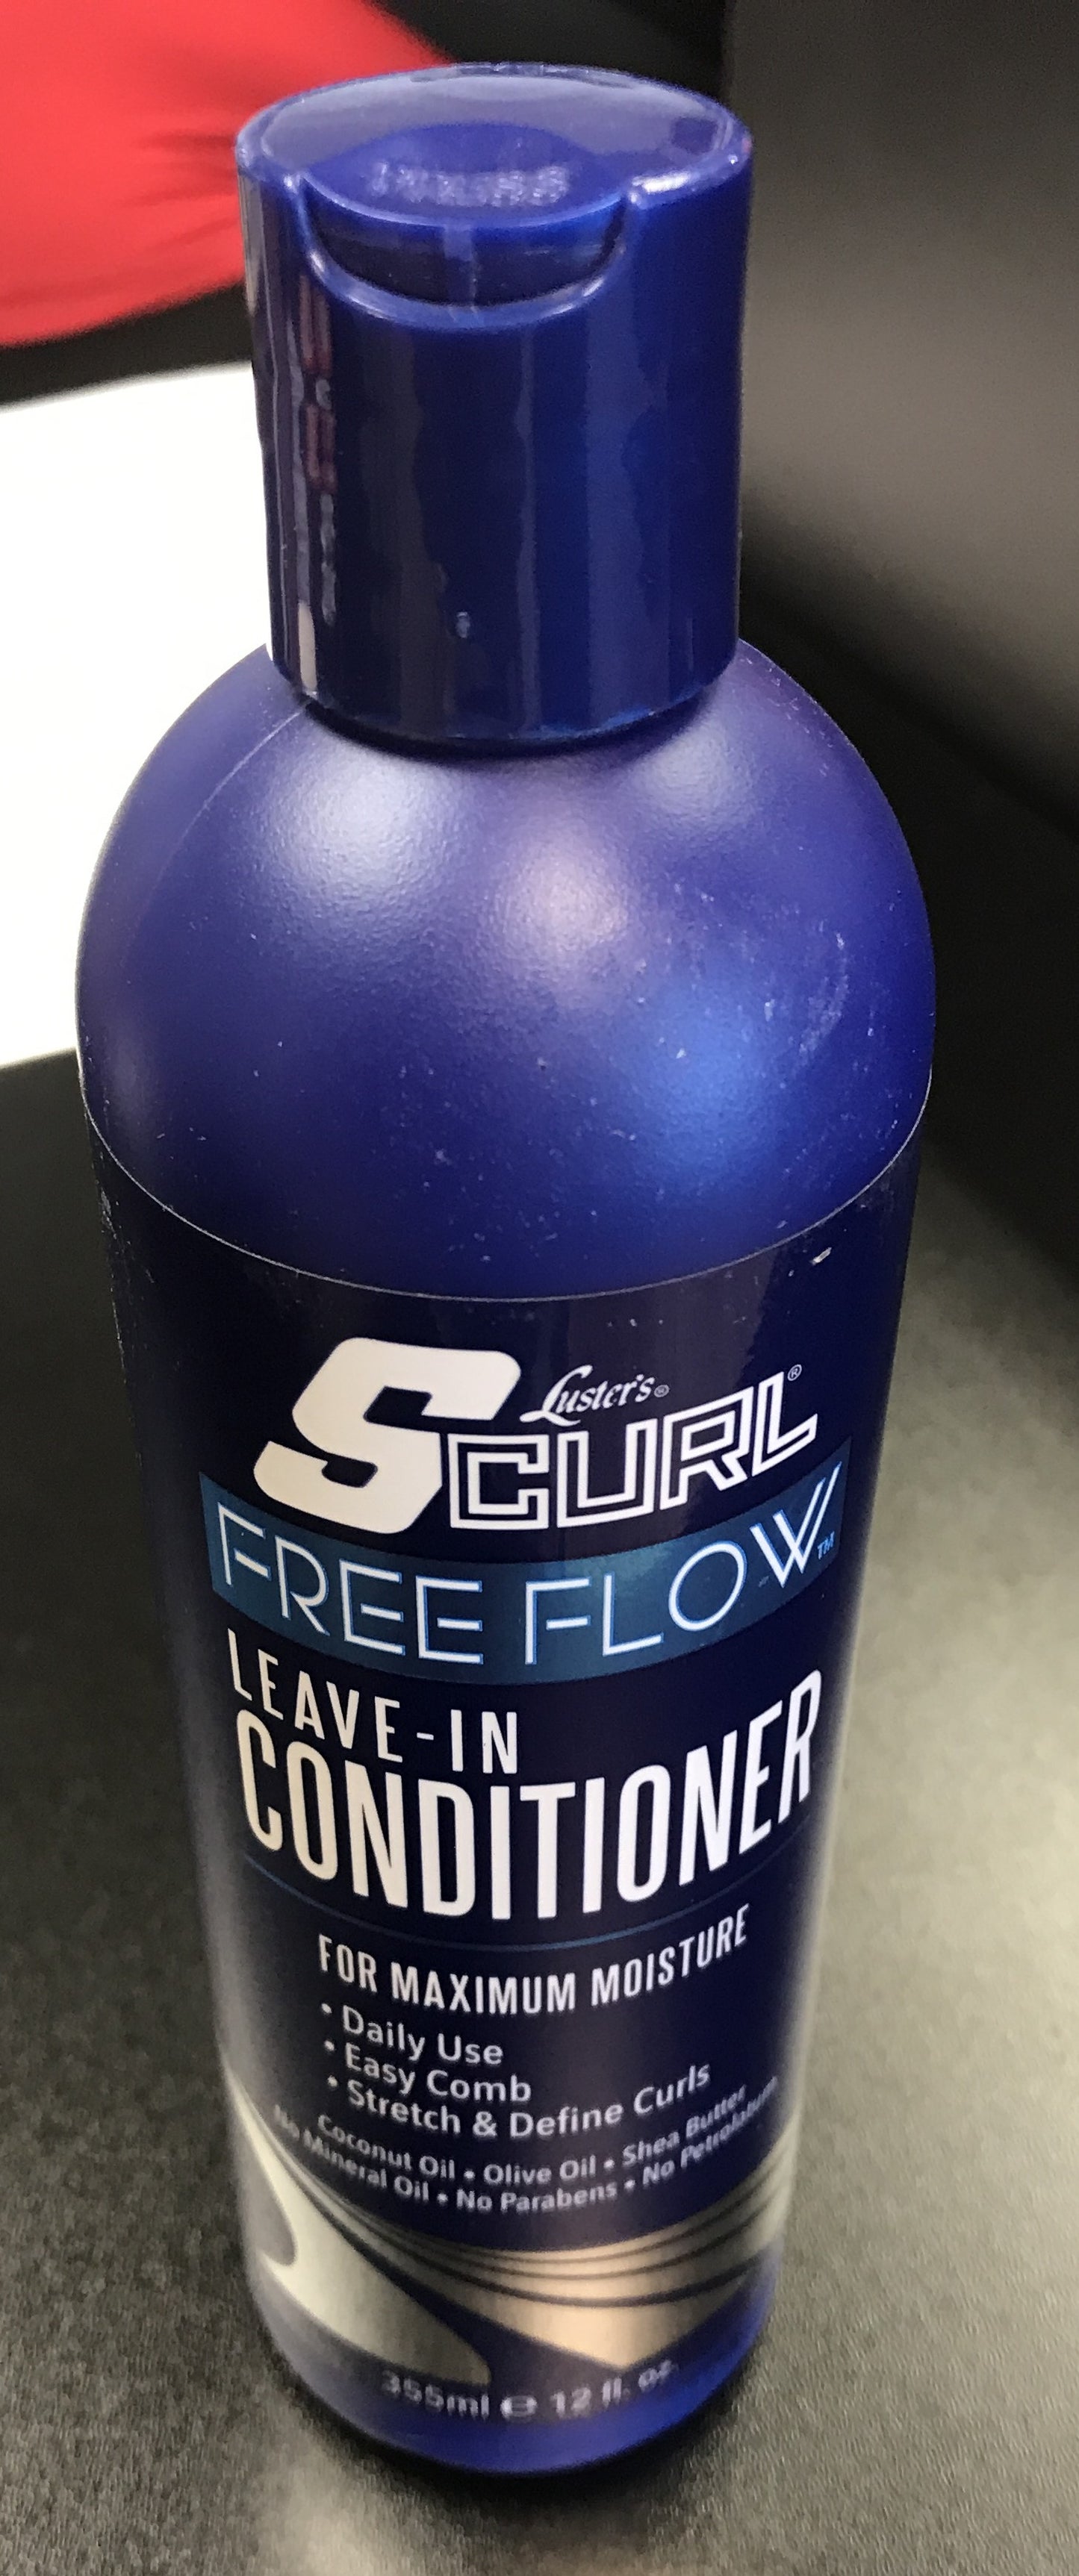 LUSTER'S SCURL FREE FLOW LEAVE-IN CONDITIONER 12 OZ